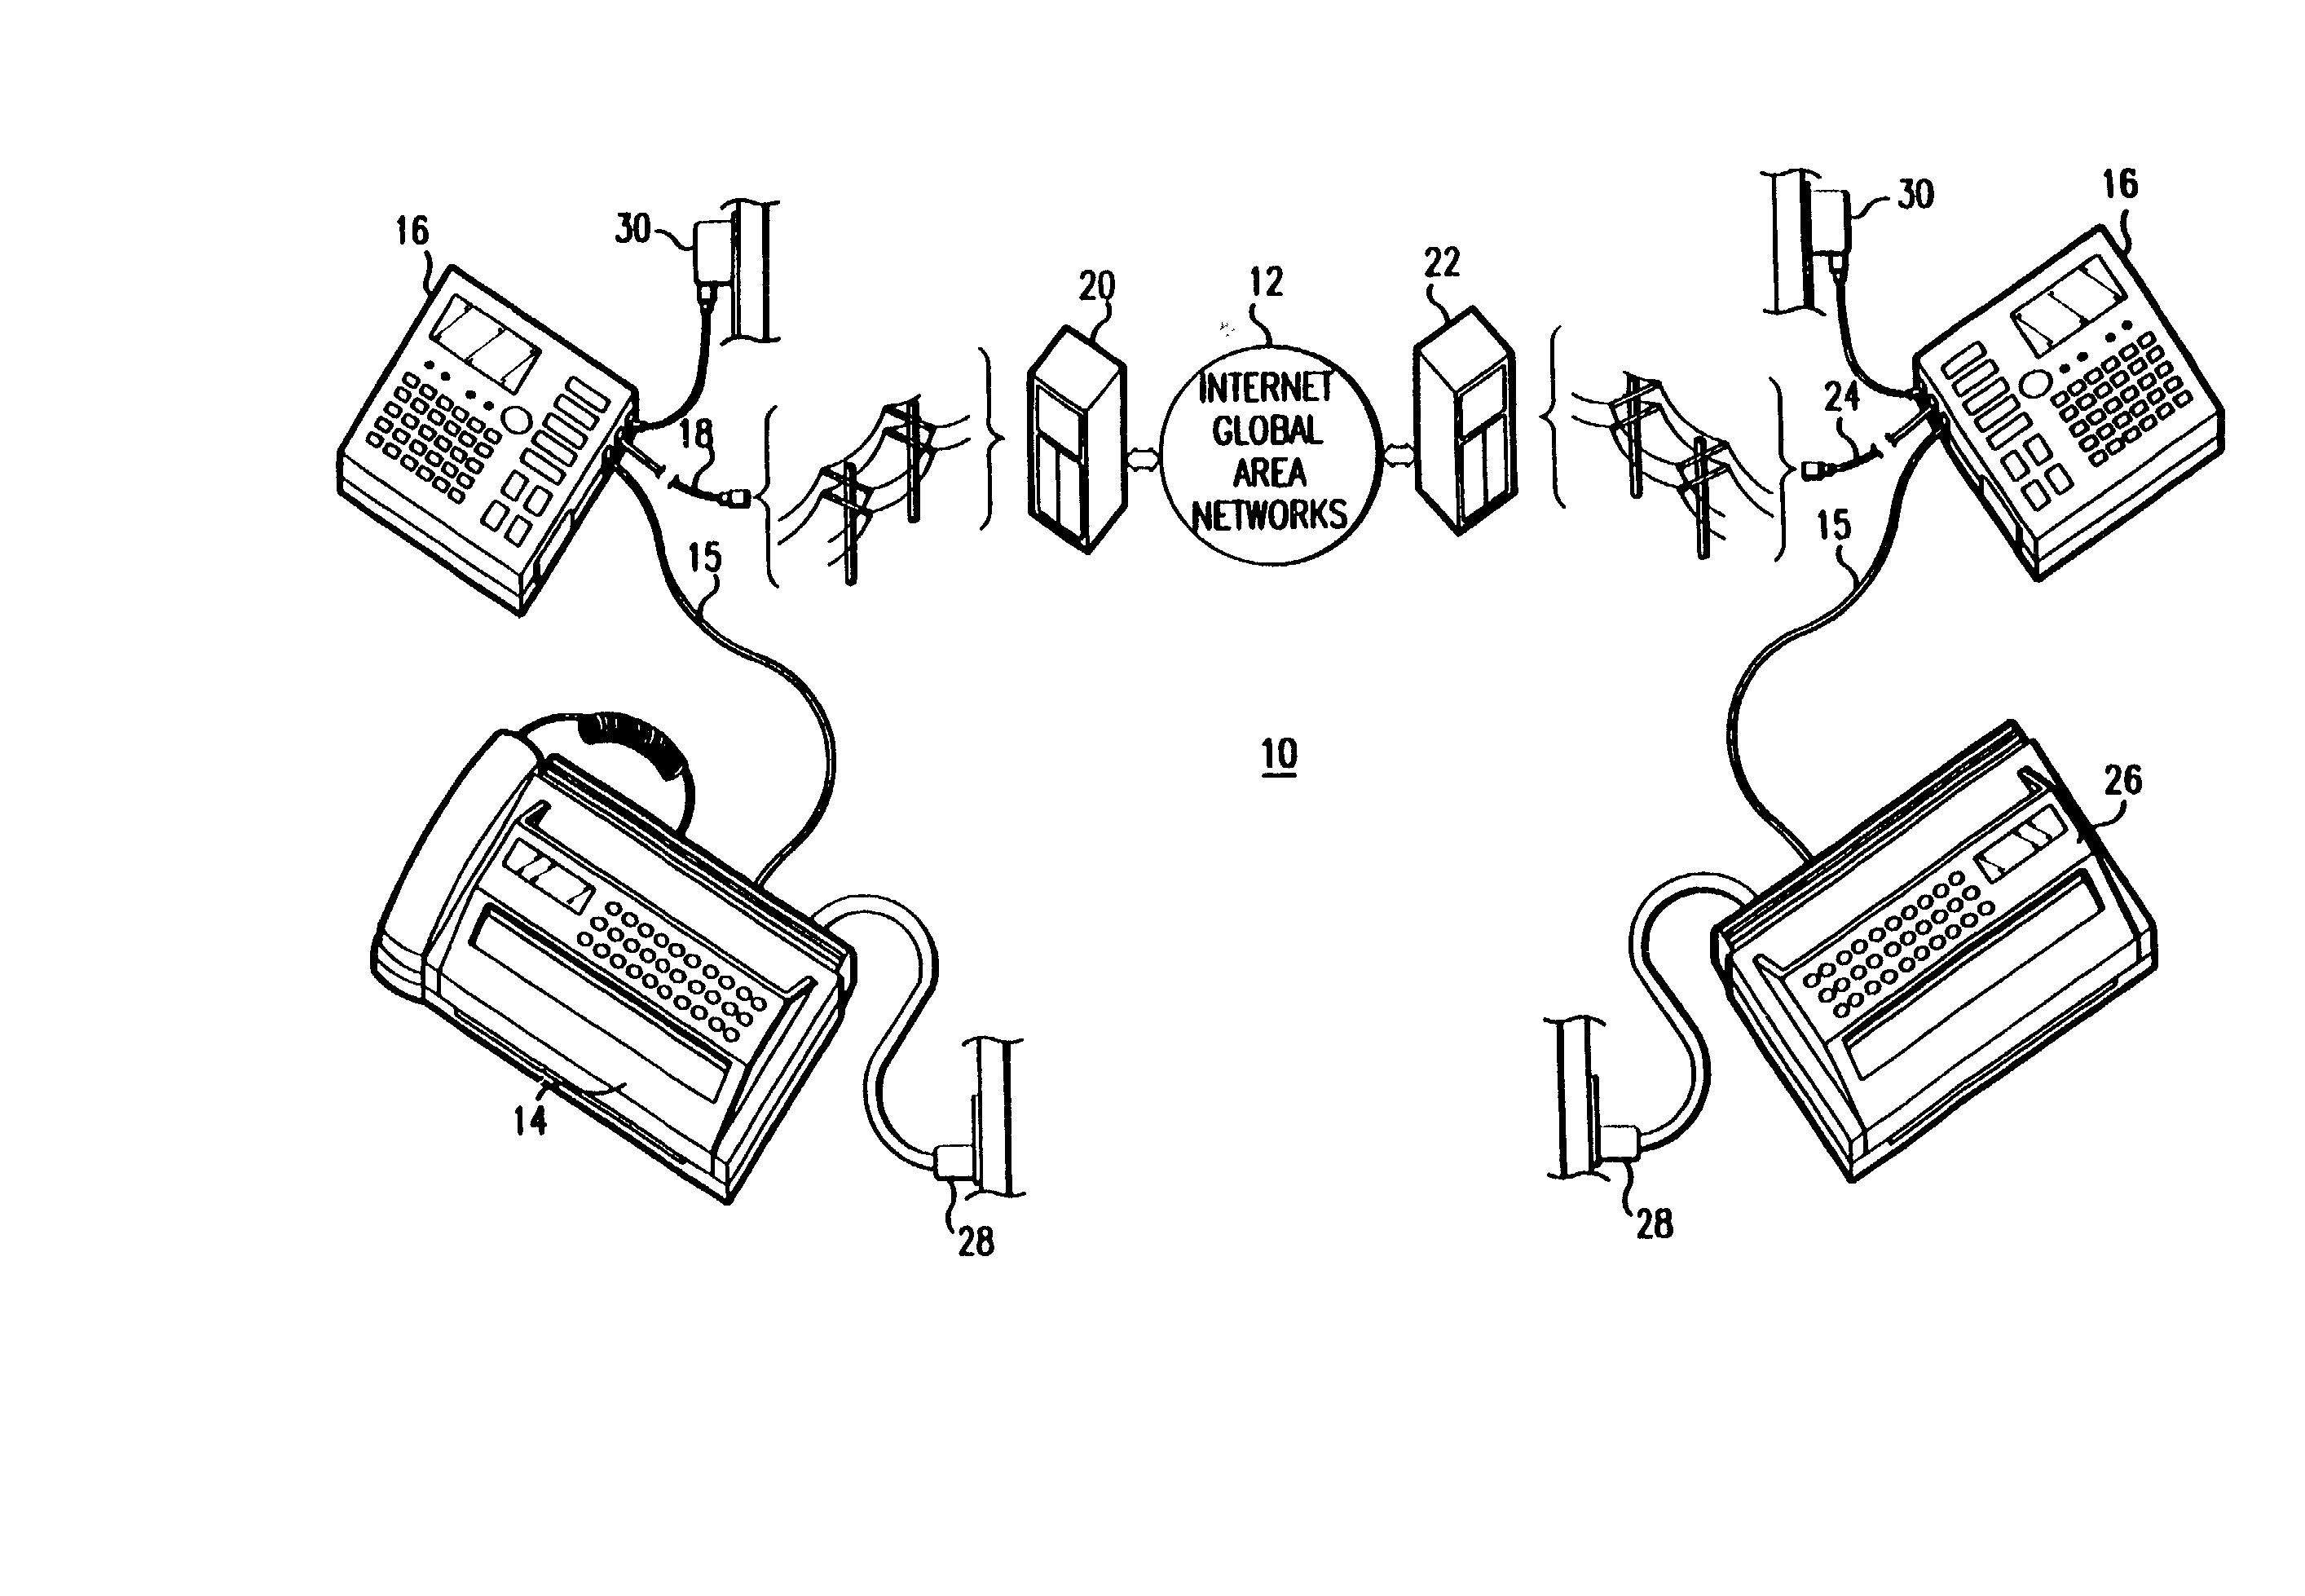 Method and apparatus for delivery of facsimile documents over a computer network